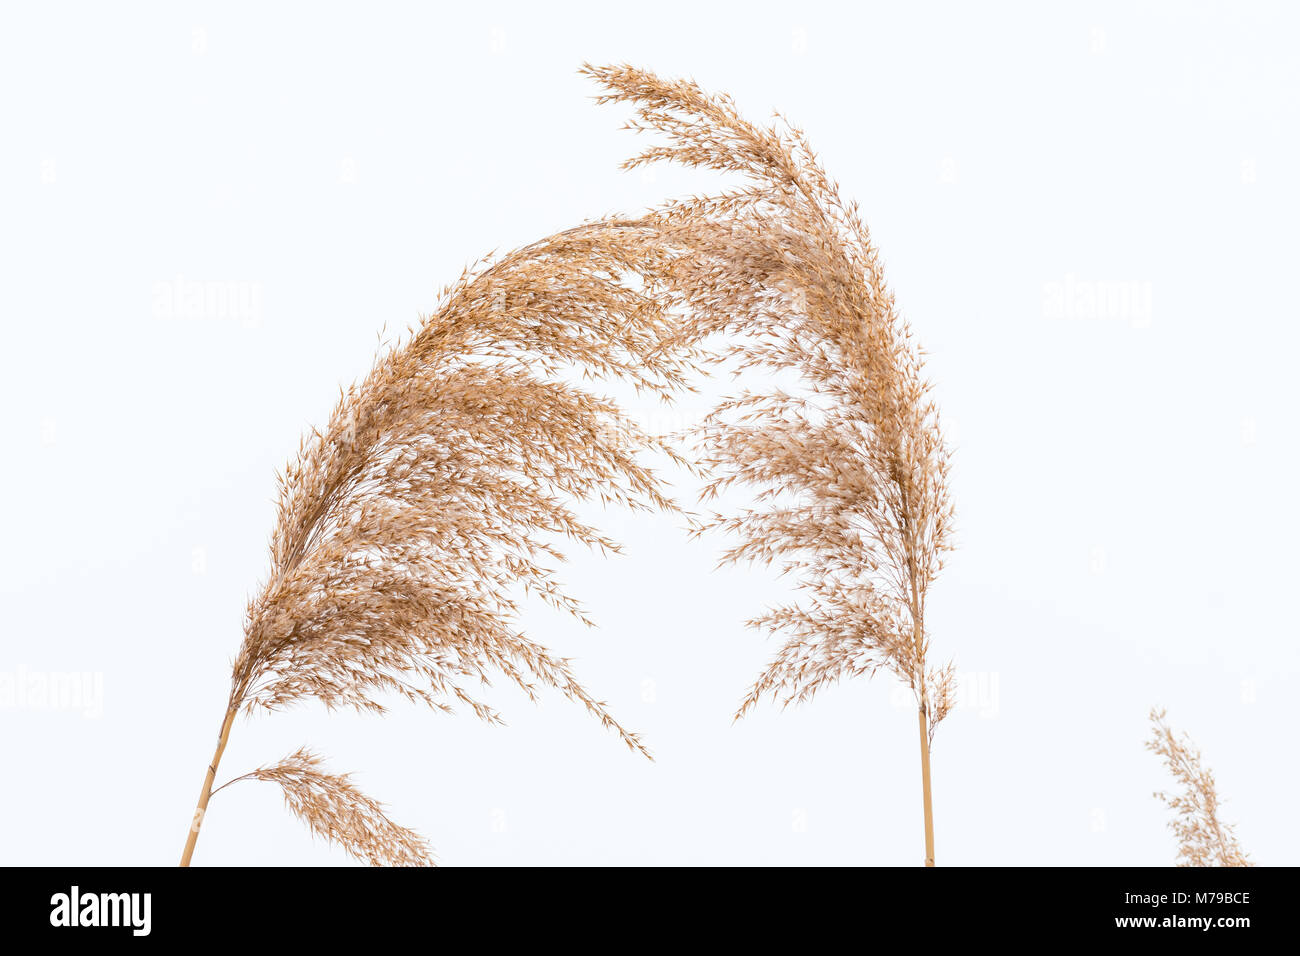 Closeup of dry panicle reed in winter white background Stock Photo